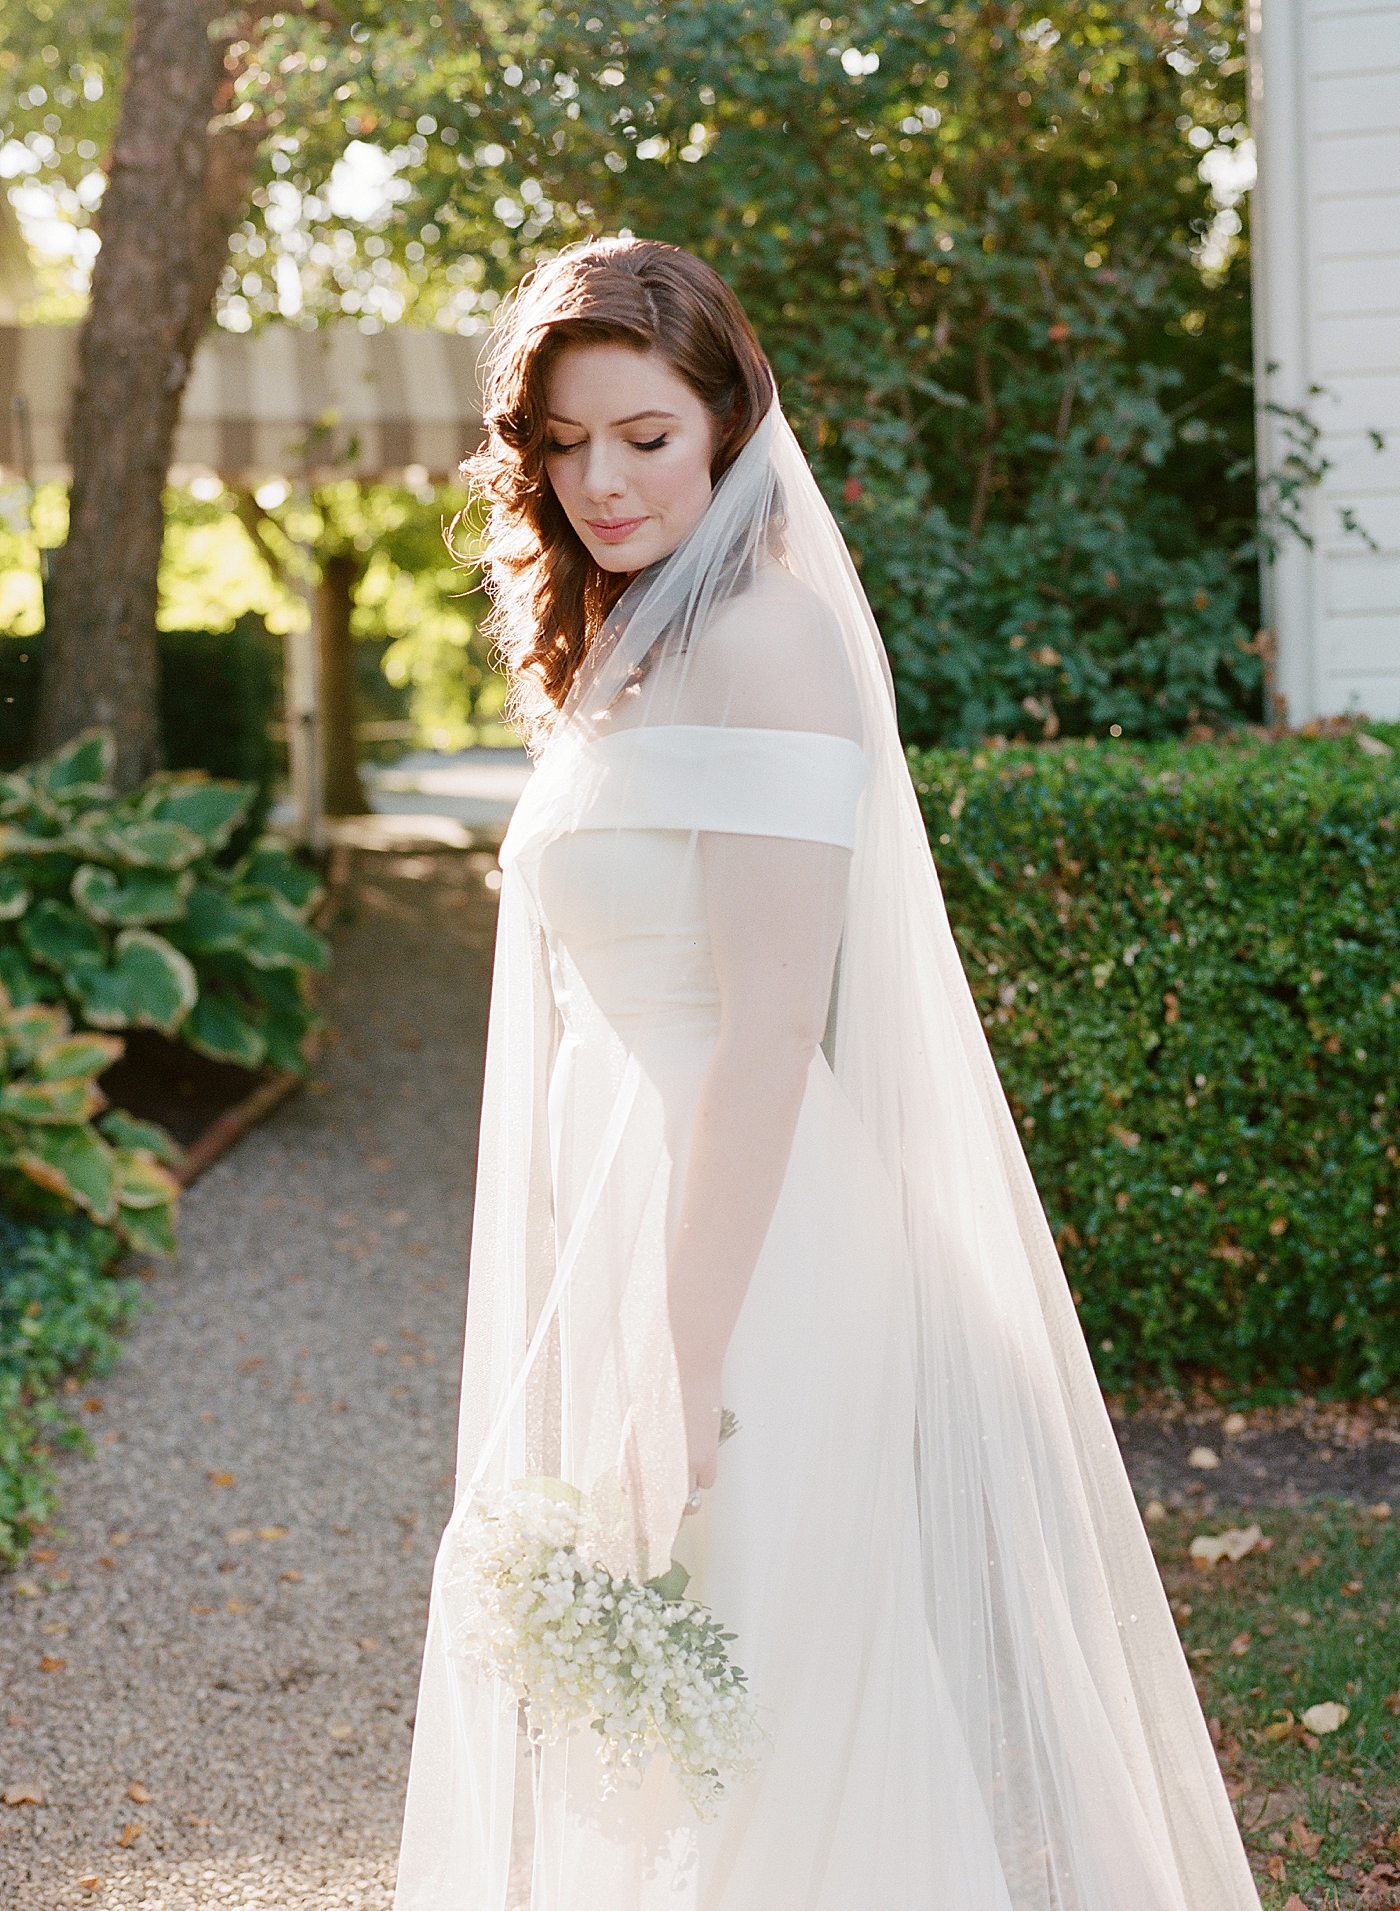 Bride posing for a portrait in a garden | Photo by Hope Helmuth Photography